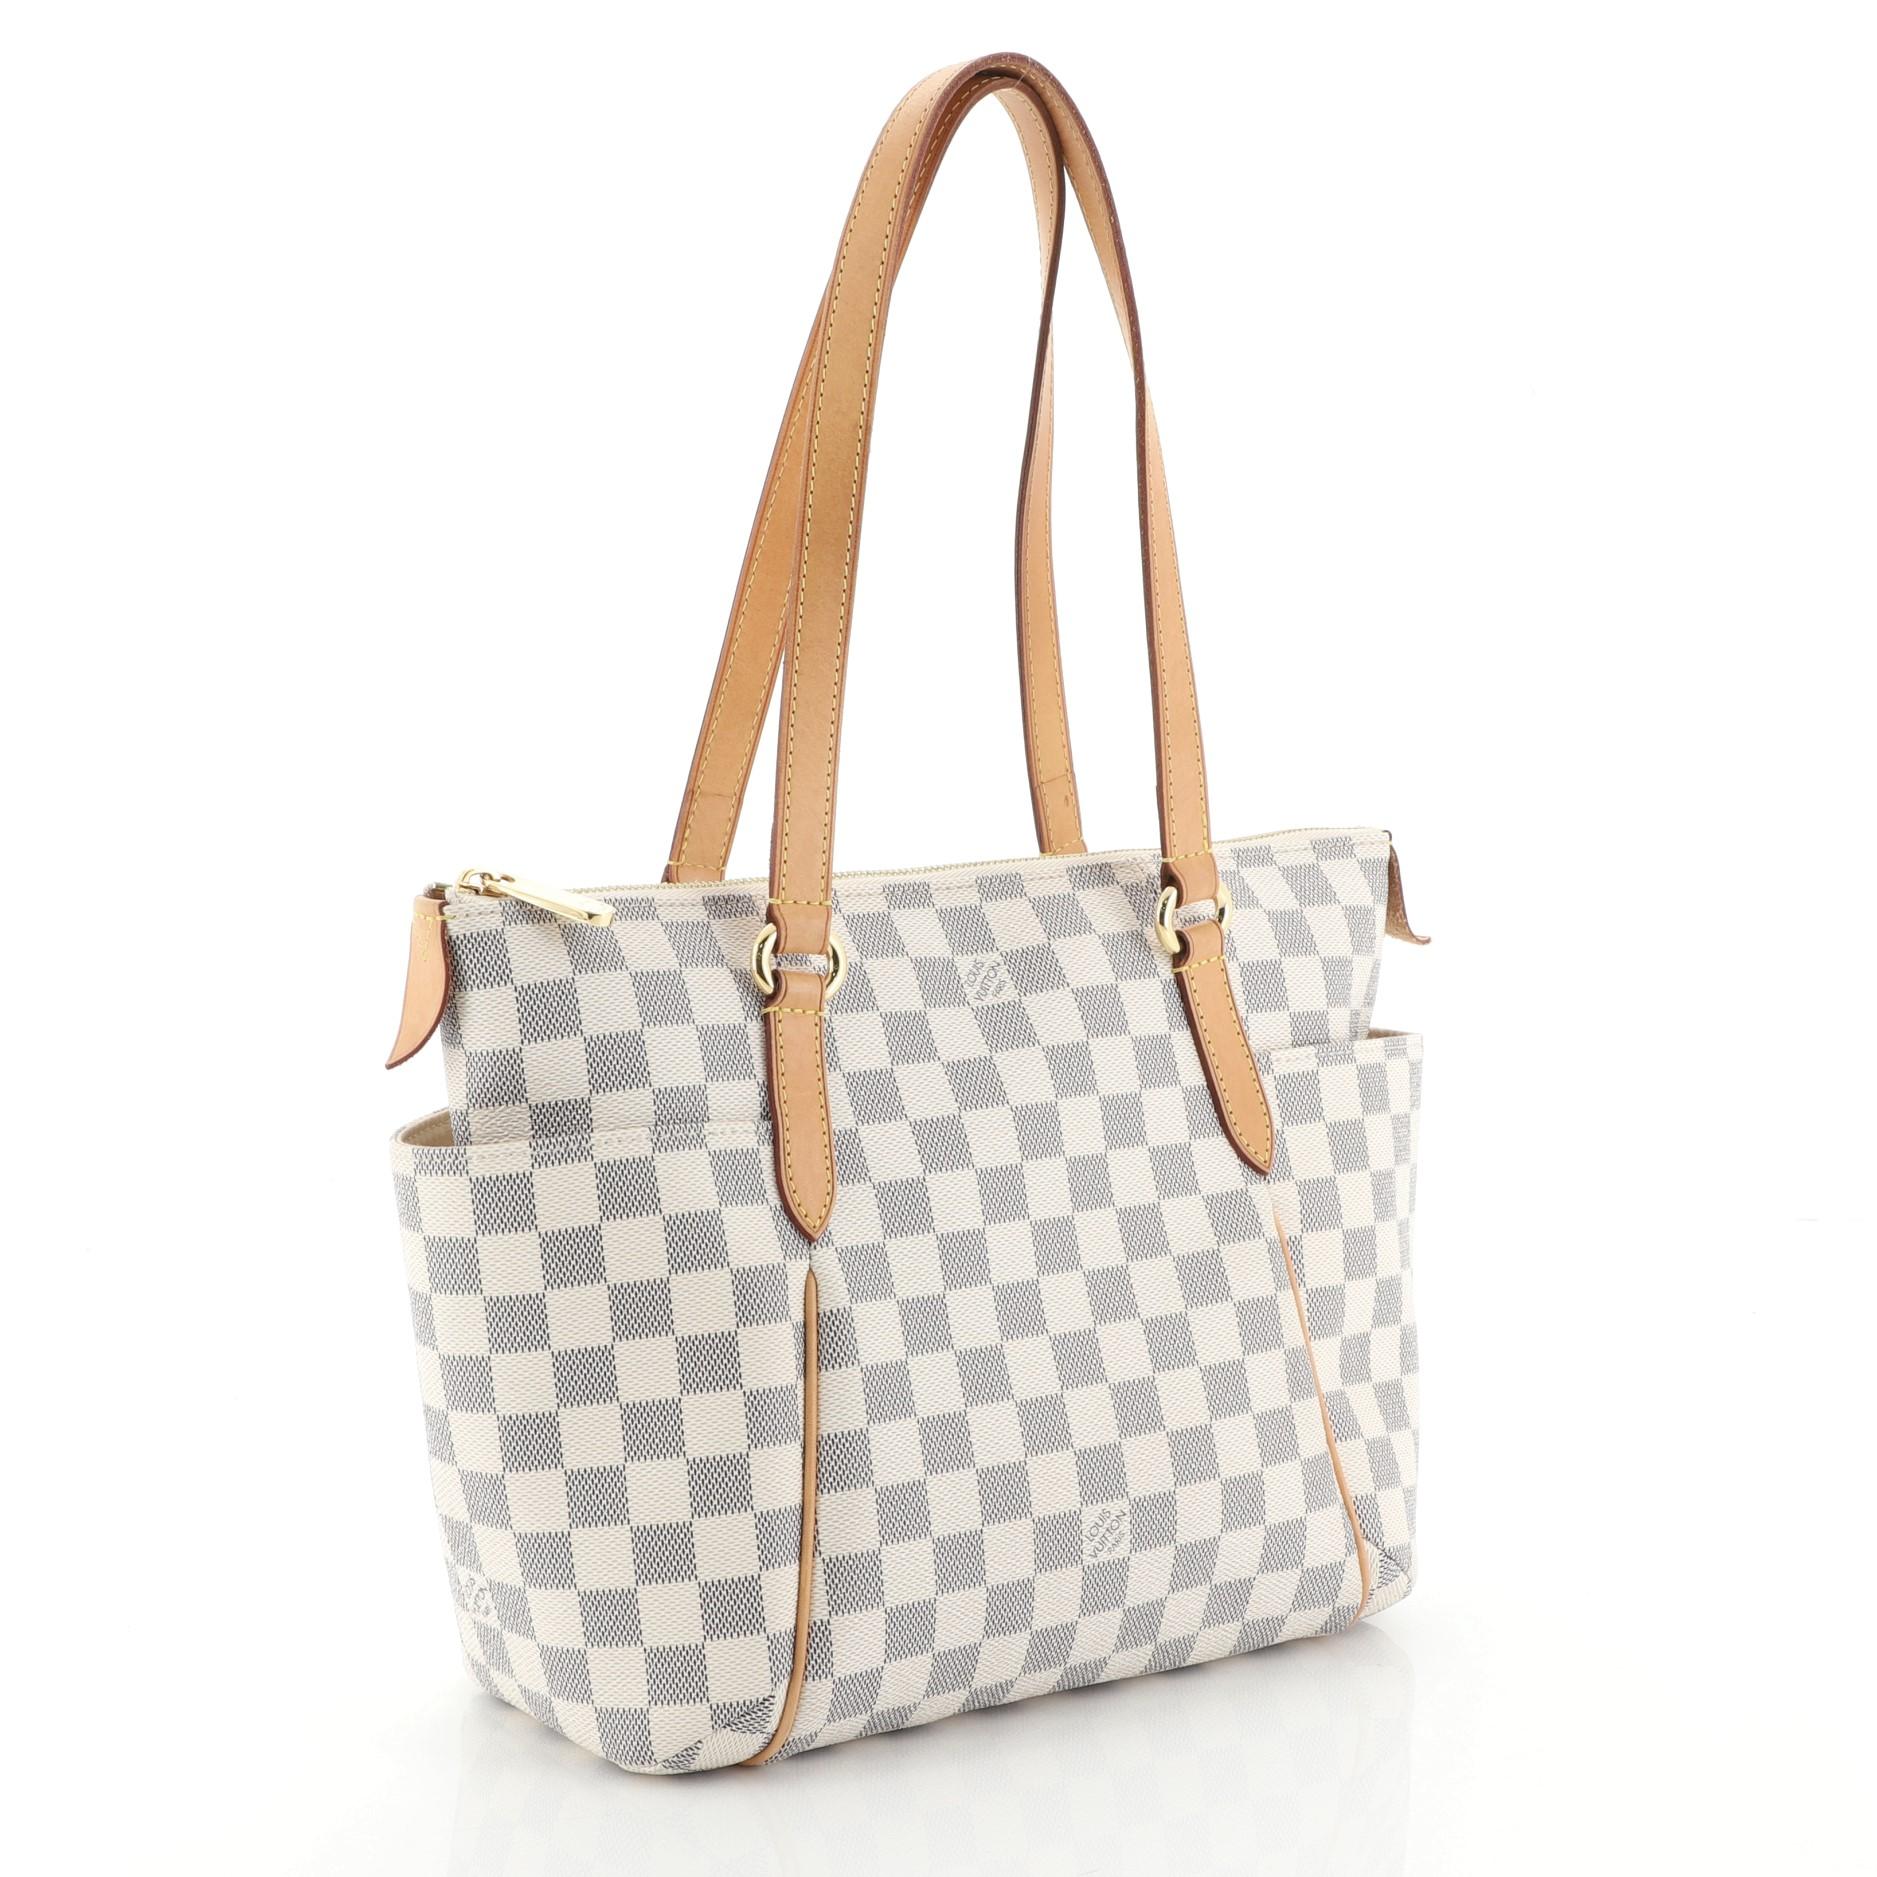 This Louis Vuitton Totally Handbag Damier PM, crafted from damier azur coated canvas, features tall cowhide leather handles and trim, two exterior lateral pockets, and gold-tone hardware. Its top zip closure opens to a neutral fabric interior with